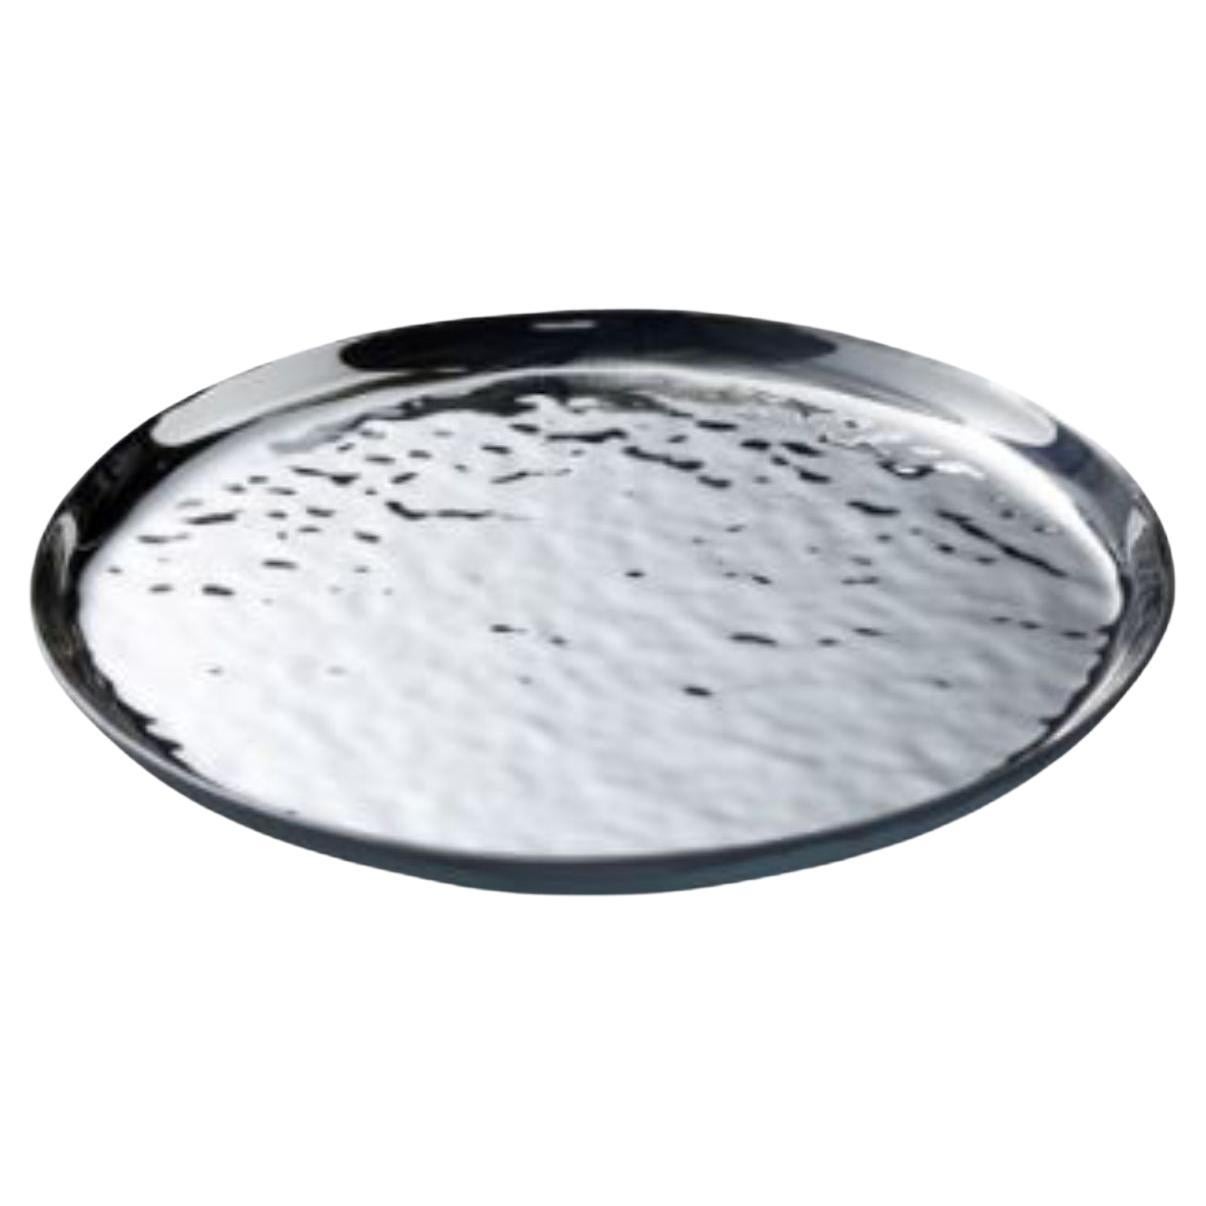 Mirage Round Tray by Radar For Sale